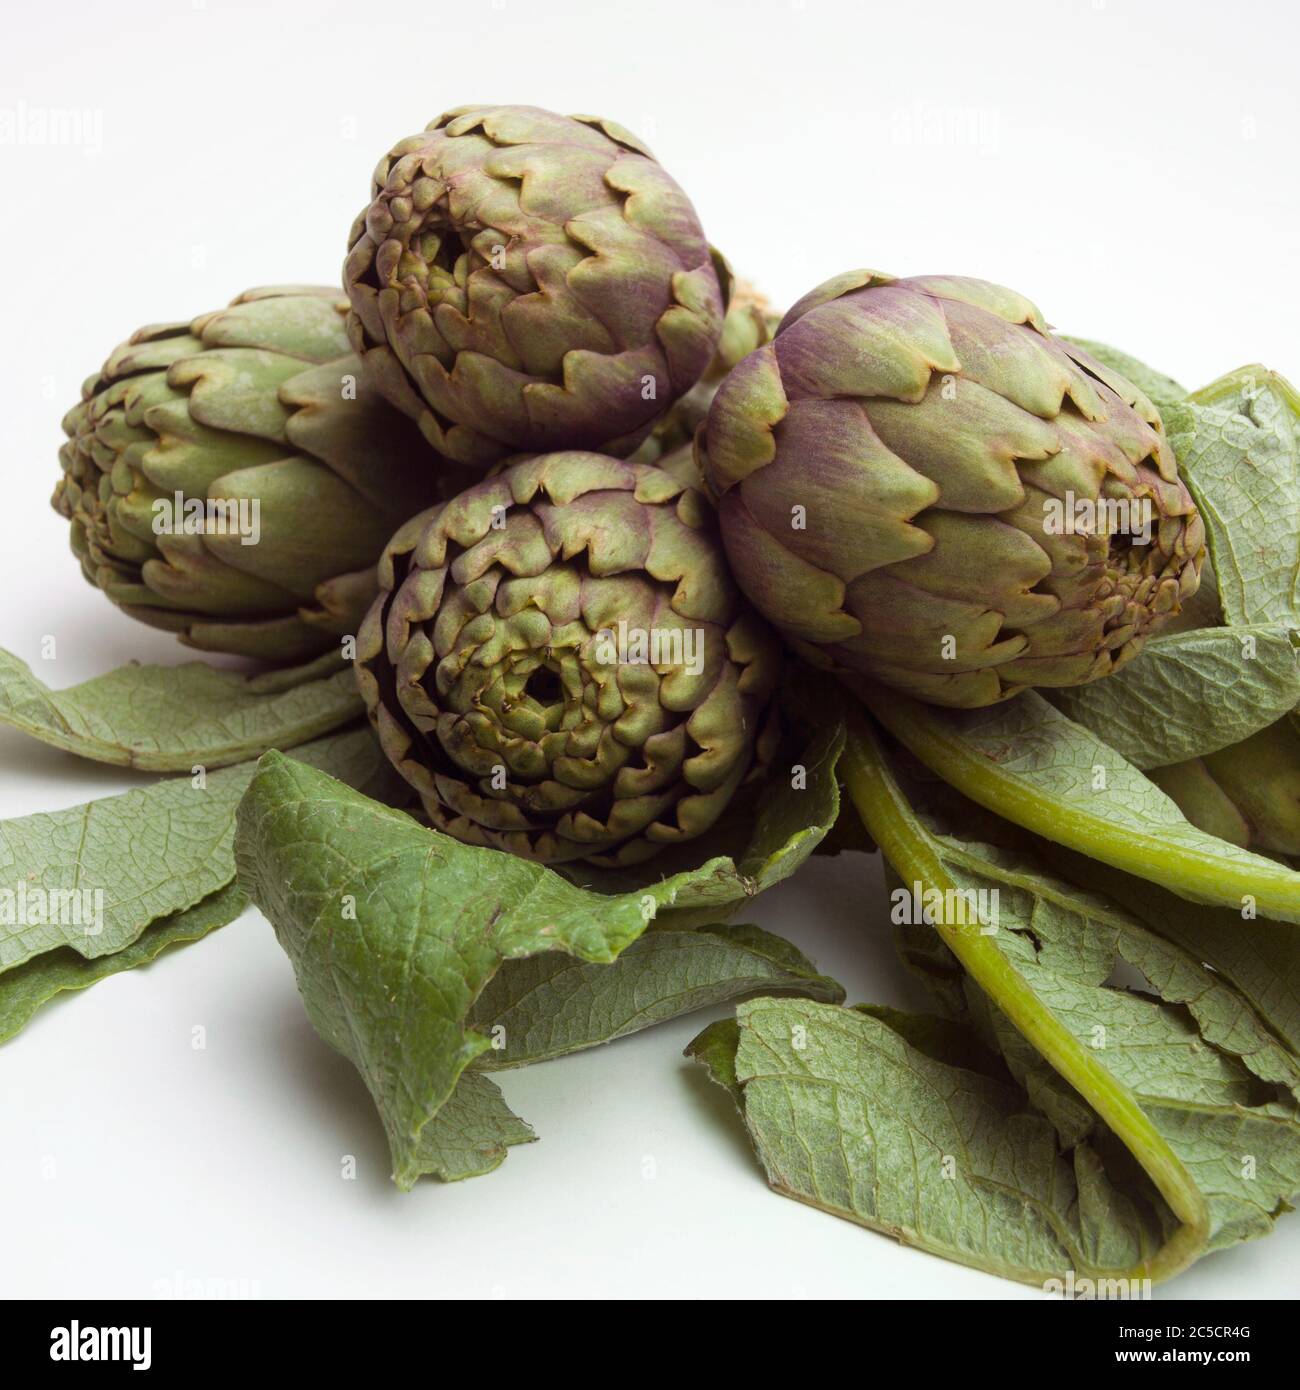 Closeup shot of artichokes isolated on the white background Stock Photo